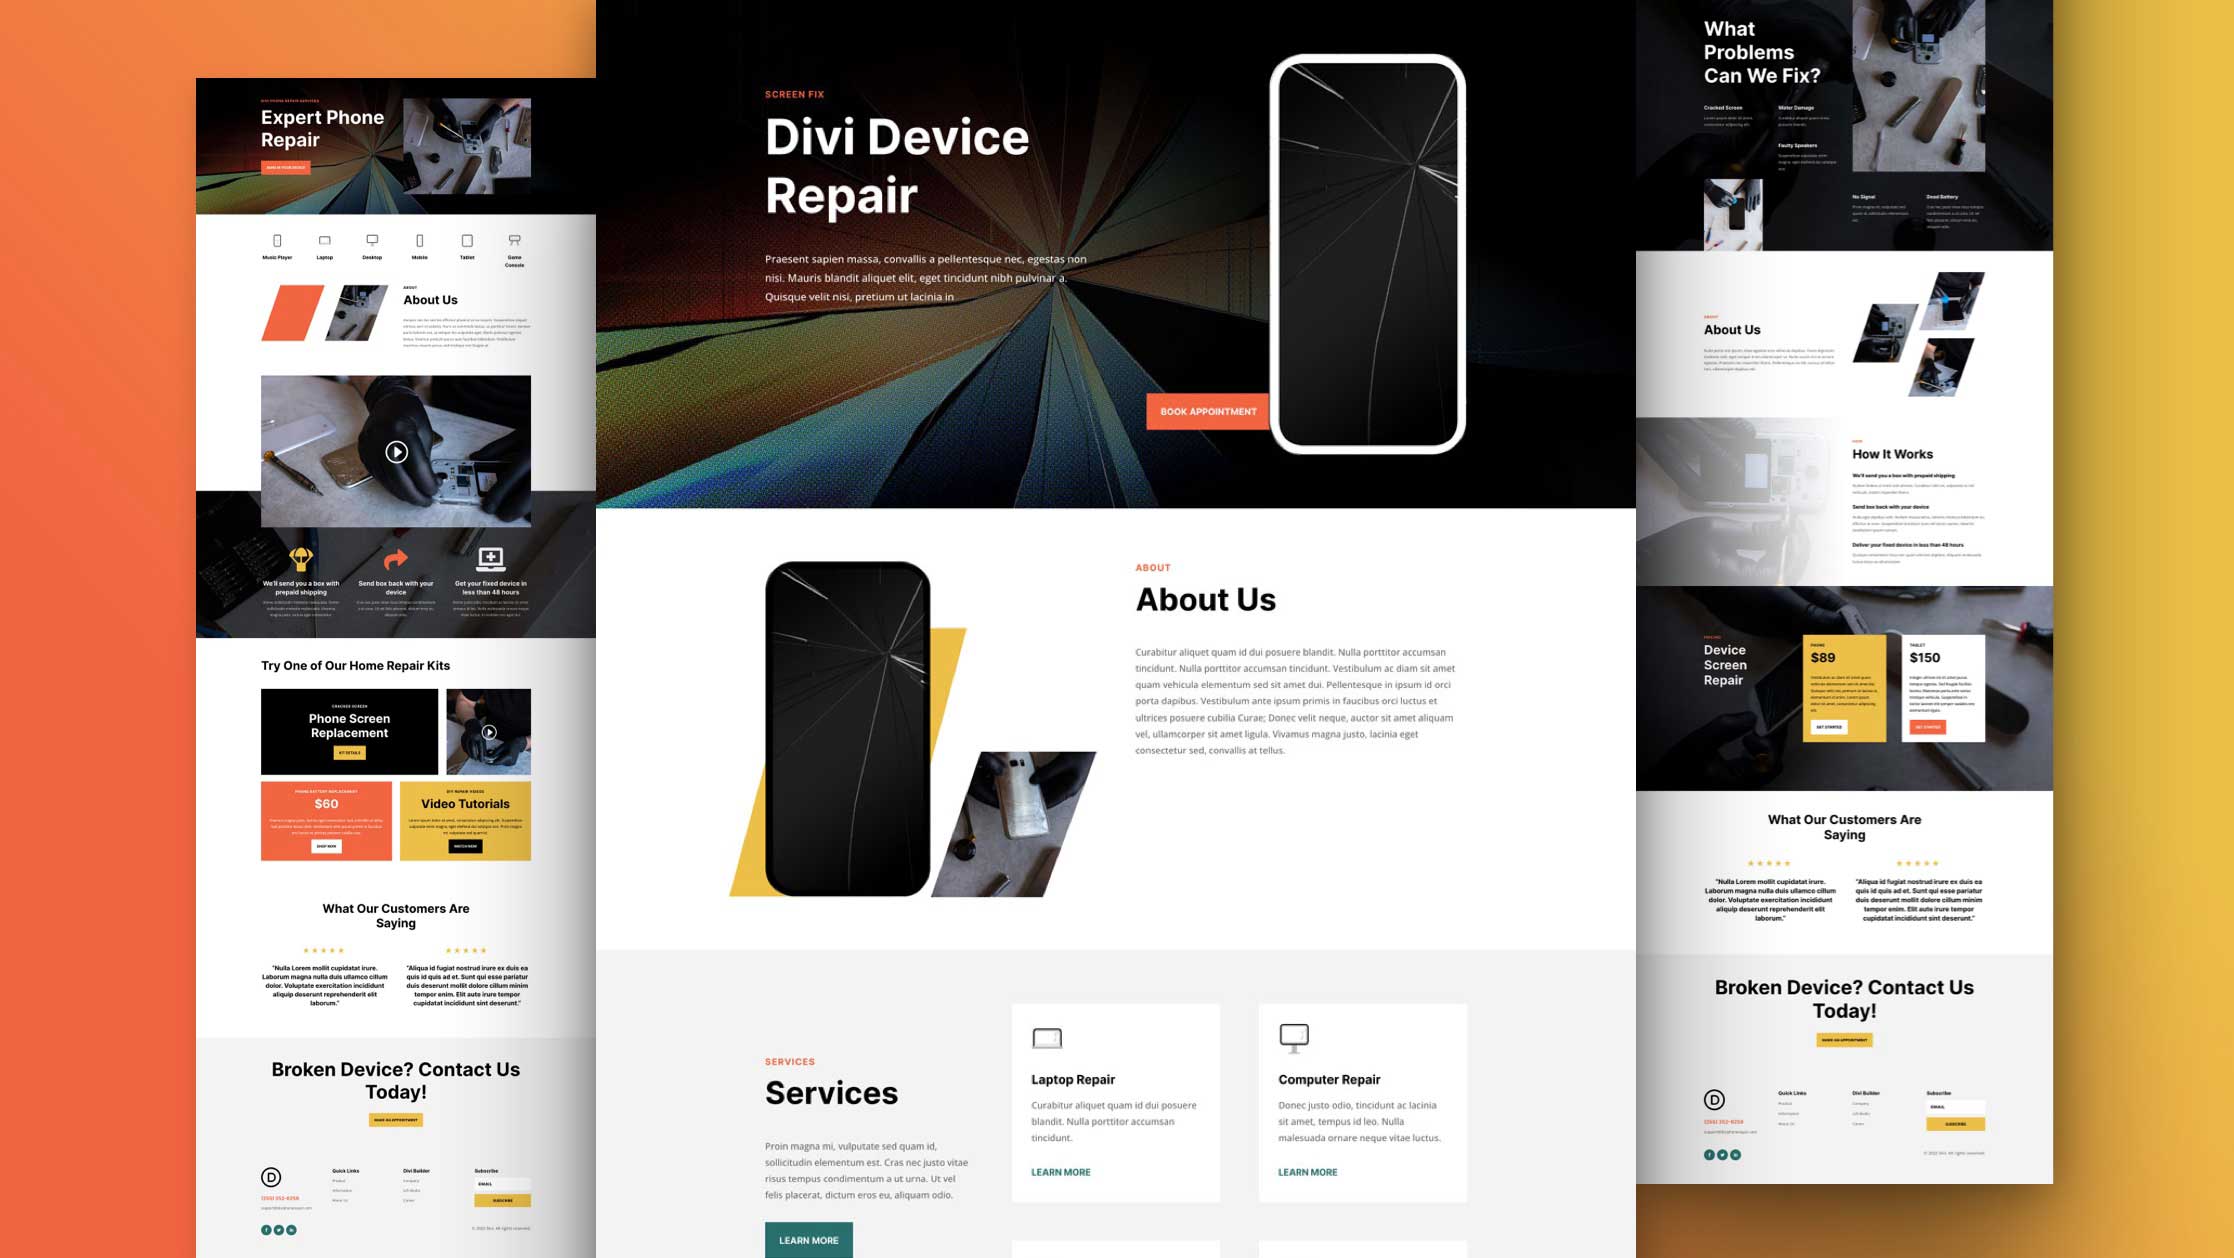 Get a FREE Device Repair Layout Pack for Divi